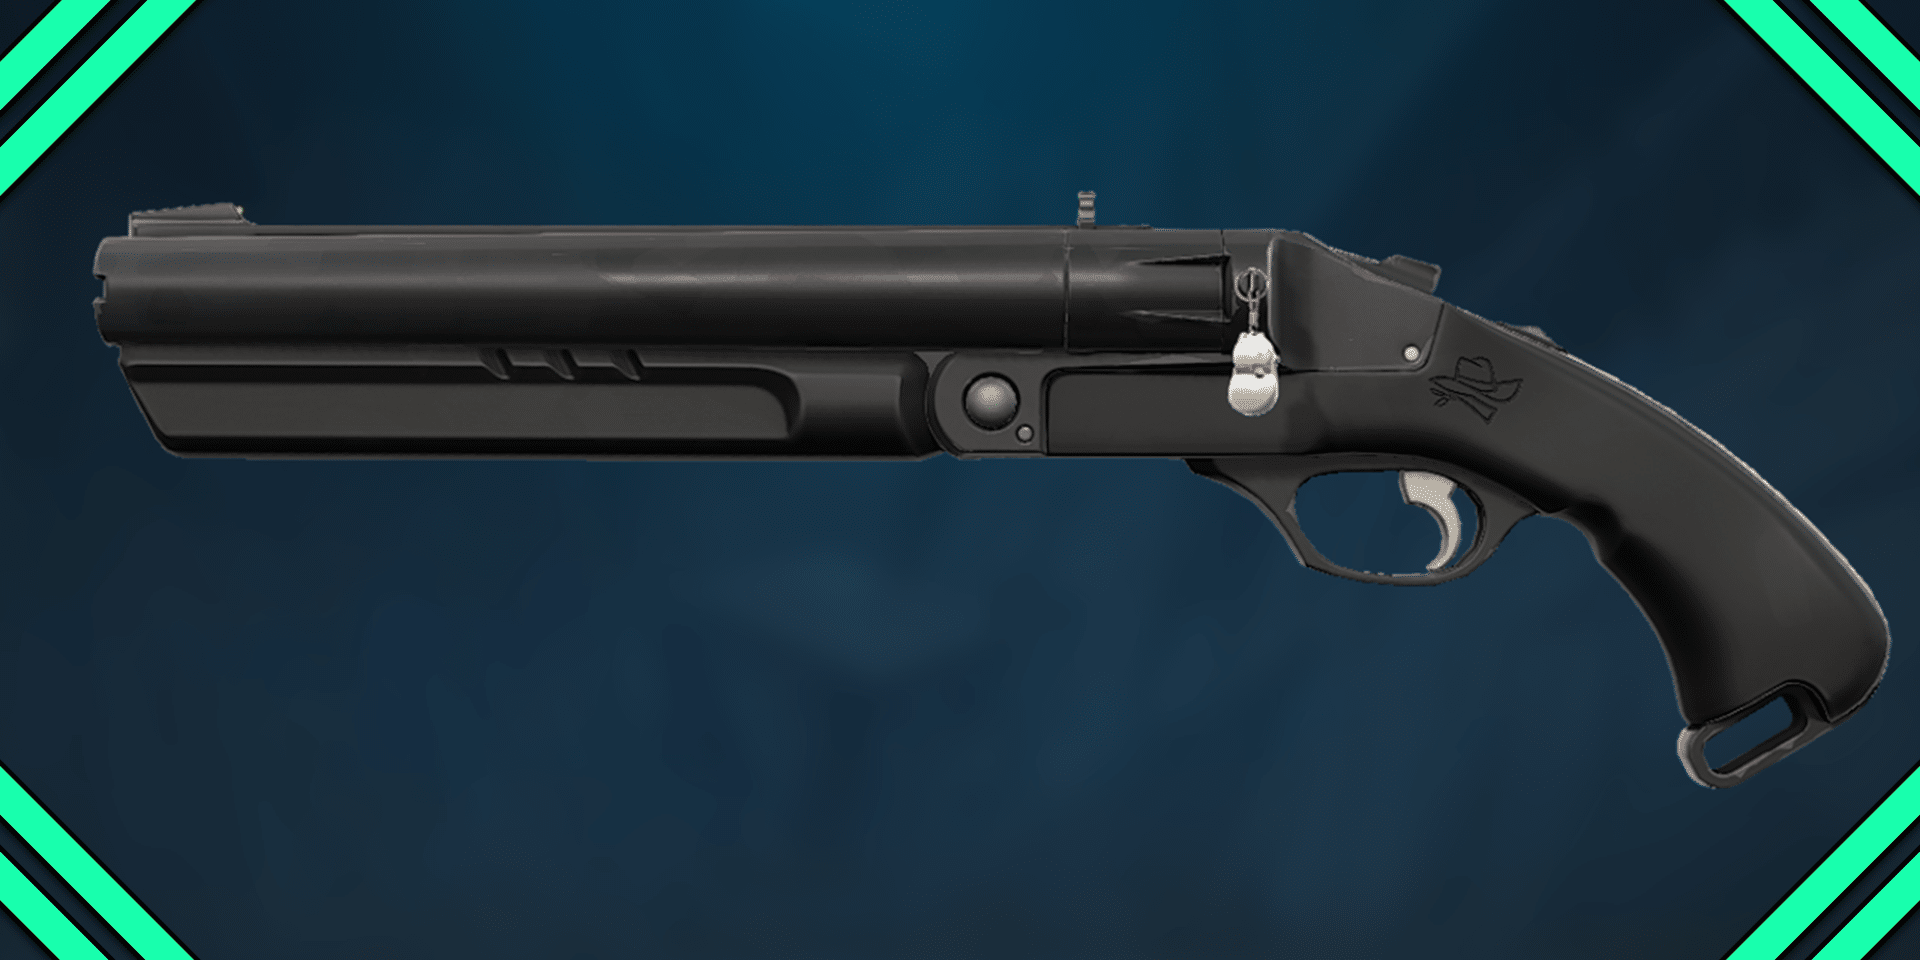 The Shorty: Complete Valorant Weapon Guide